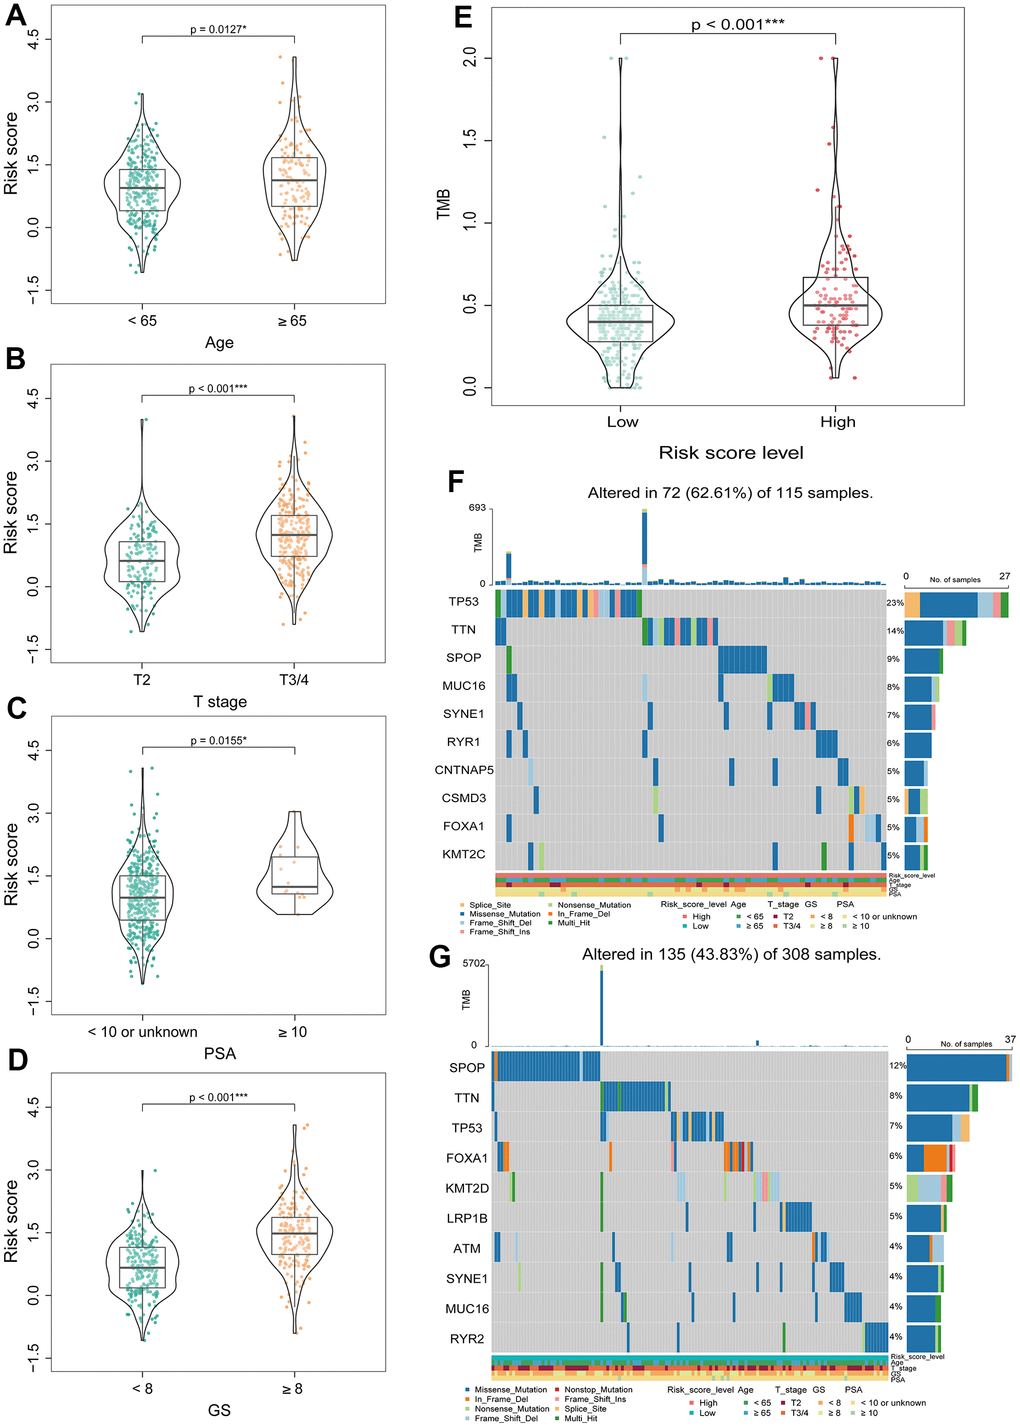 Correlation analysis between BMRS and clinicopathological characteristics of patients with PCa. (A–D) Comparison of differences in BMRS between patients with different Age, T stage, PSA and Gleason score subgroups. (E) Analysis of the differences in TMB between the two risk groups. (F) Waterfall plot of the top 10 mutated genes in the high-risk group. (G) Waterfall plot of the top 10 mutated genes in the low-risk group. * p p p 